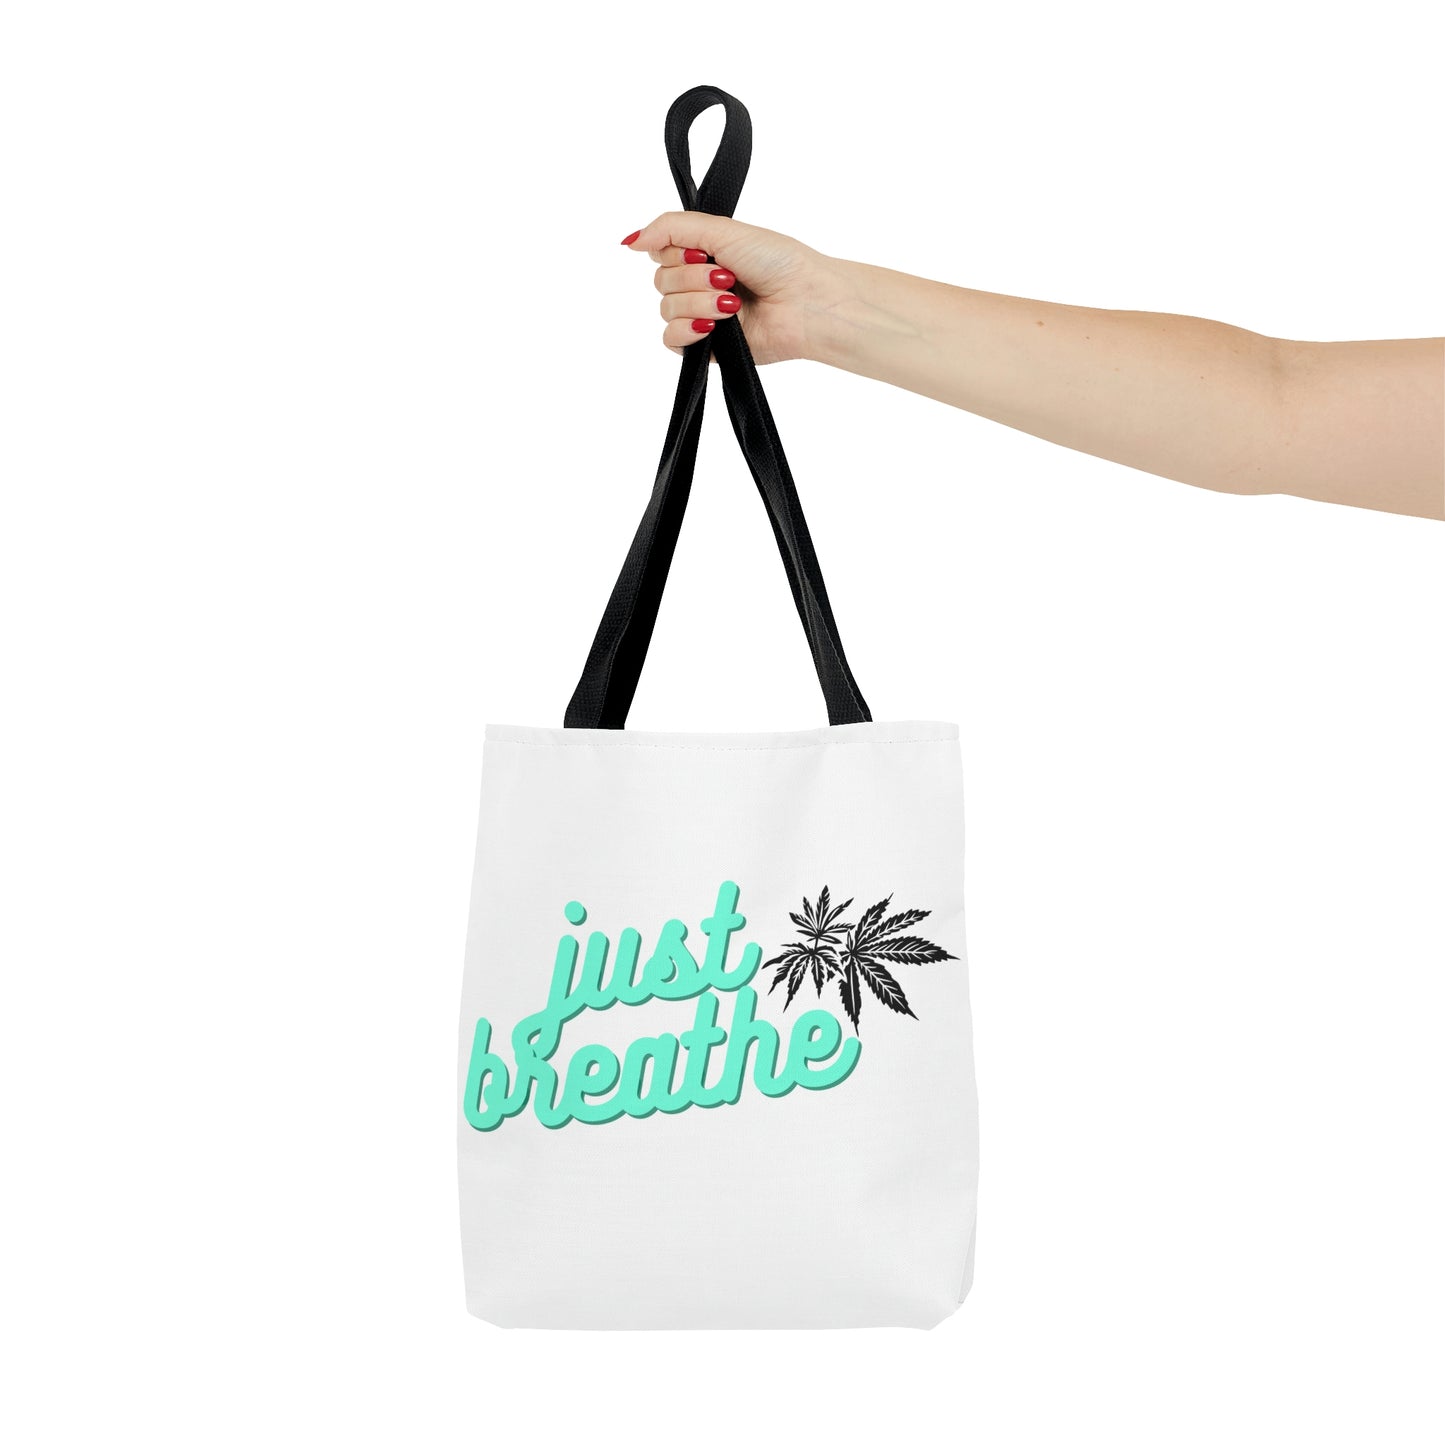 A woman with red nails holds out the Just Breathe Cannabis Tote Bag